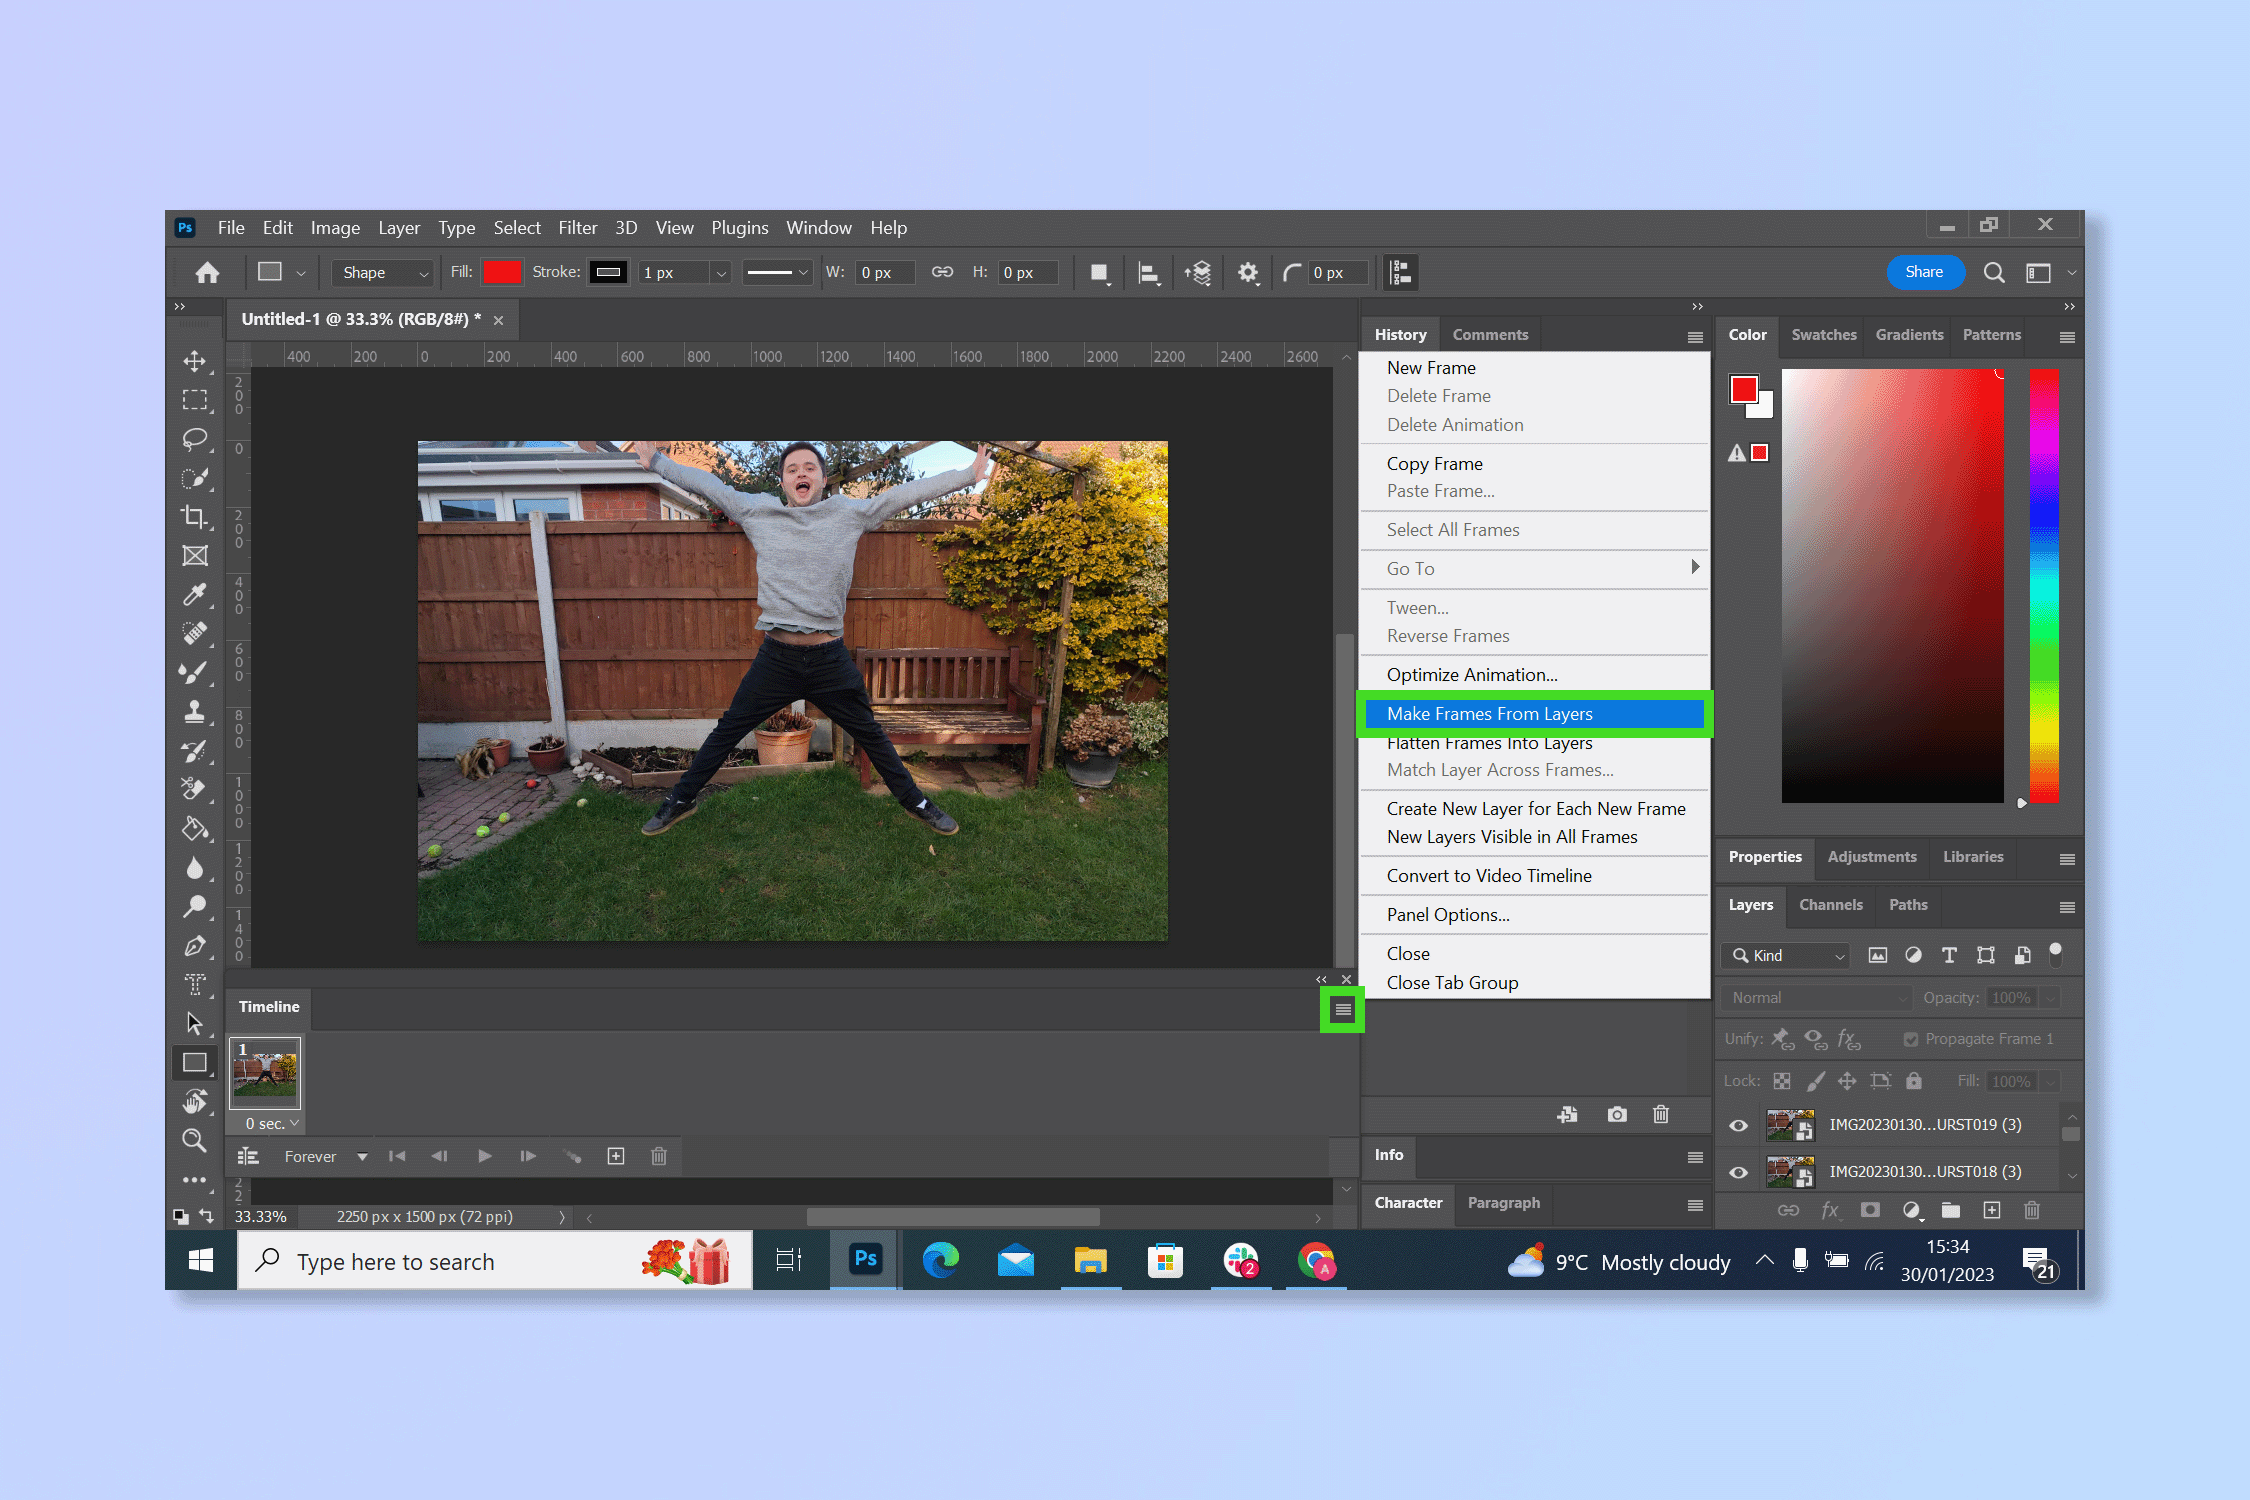 The fourth step is to create a GIF file in Photoshop